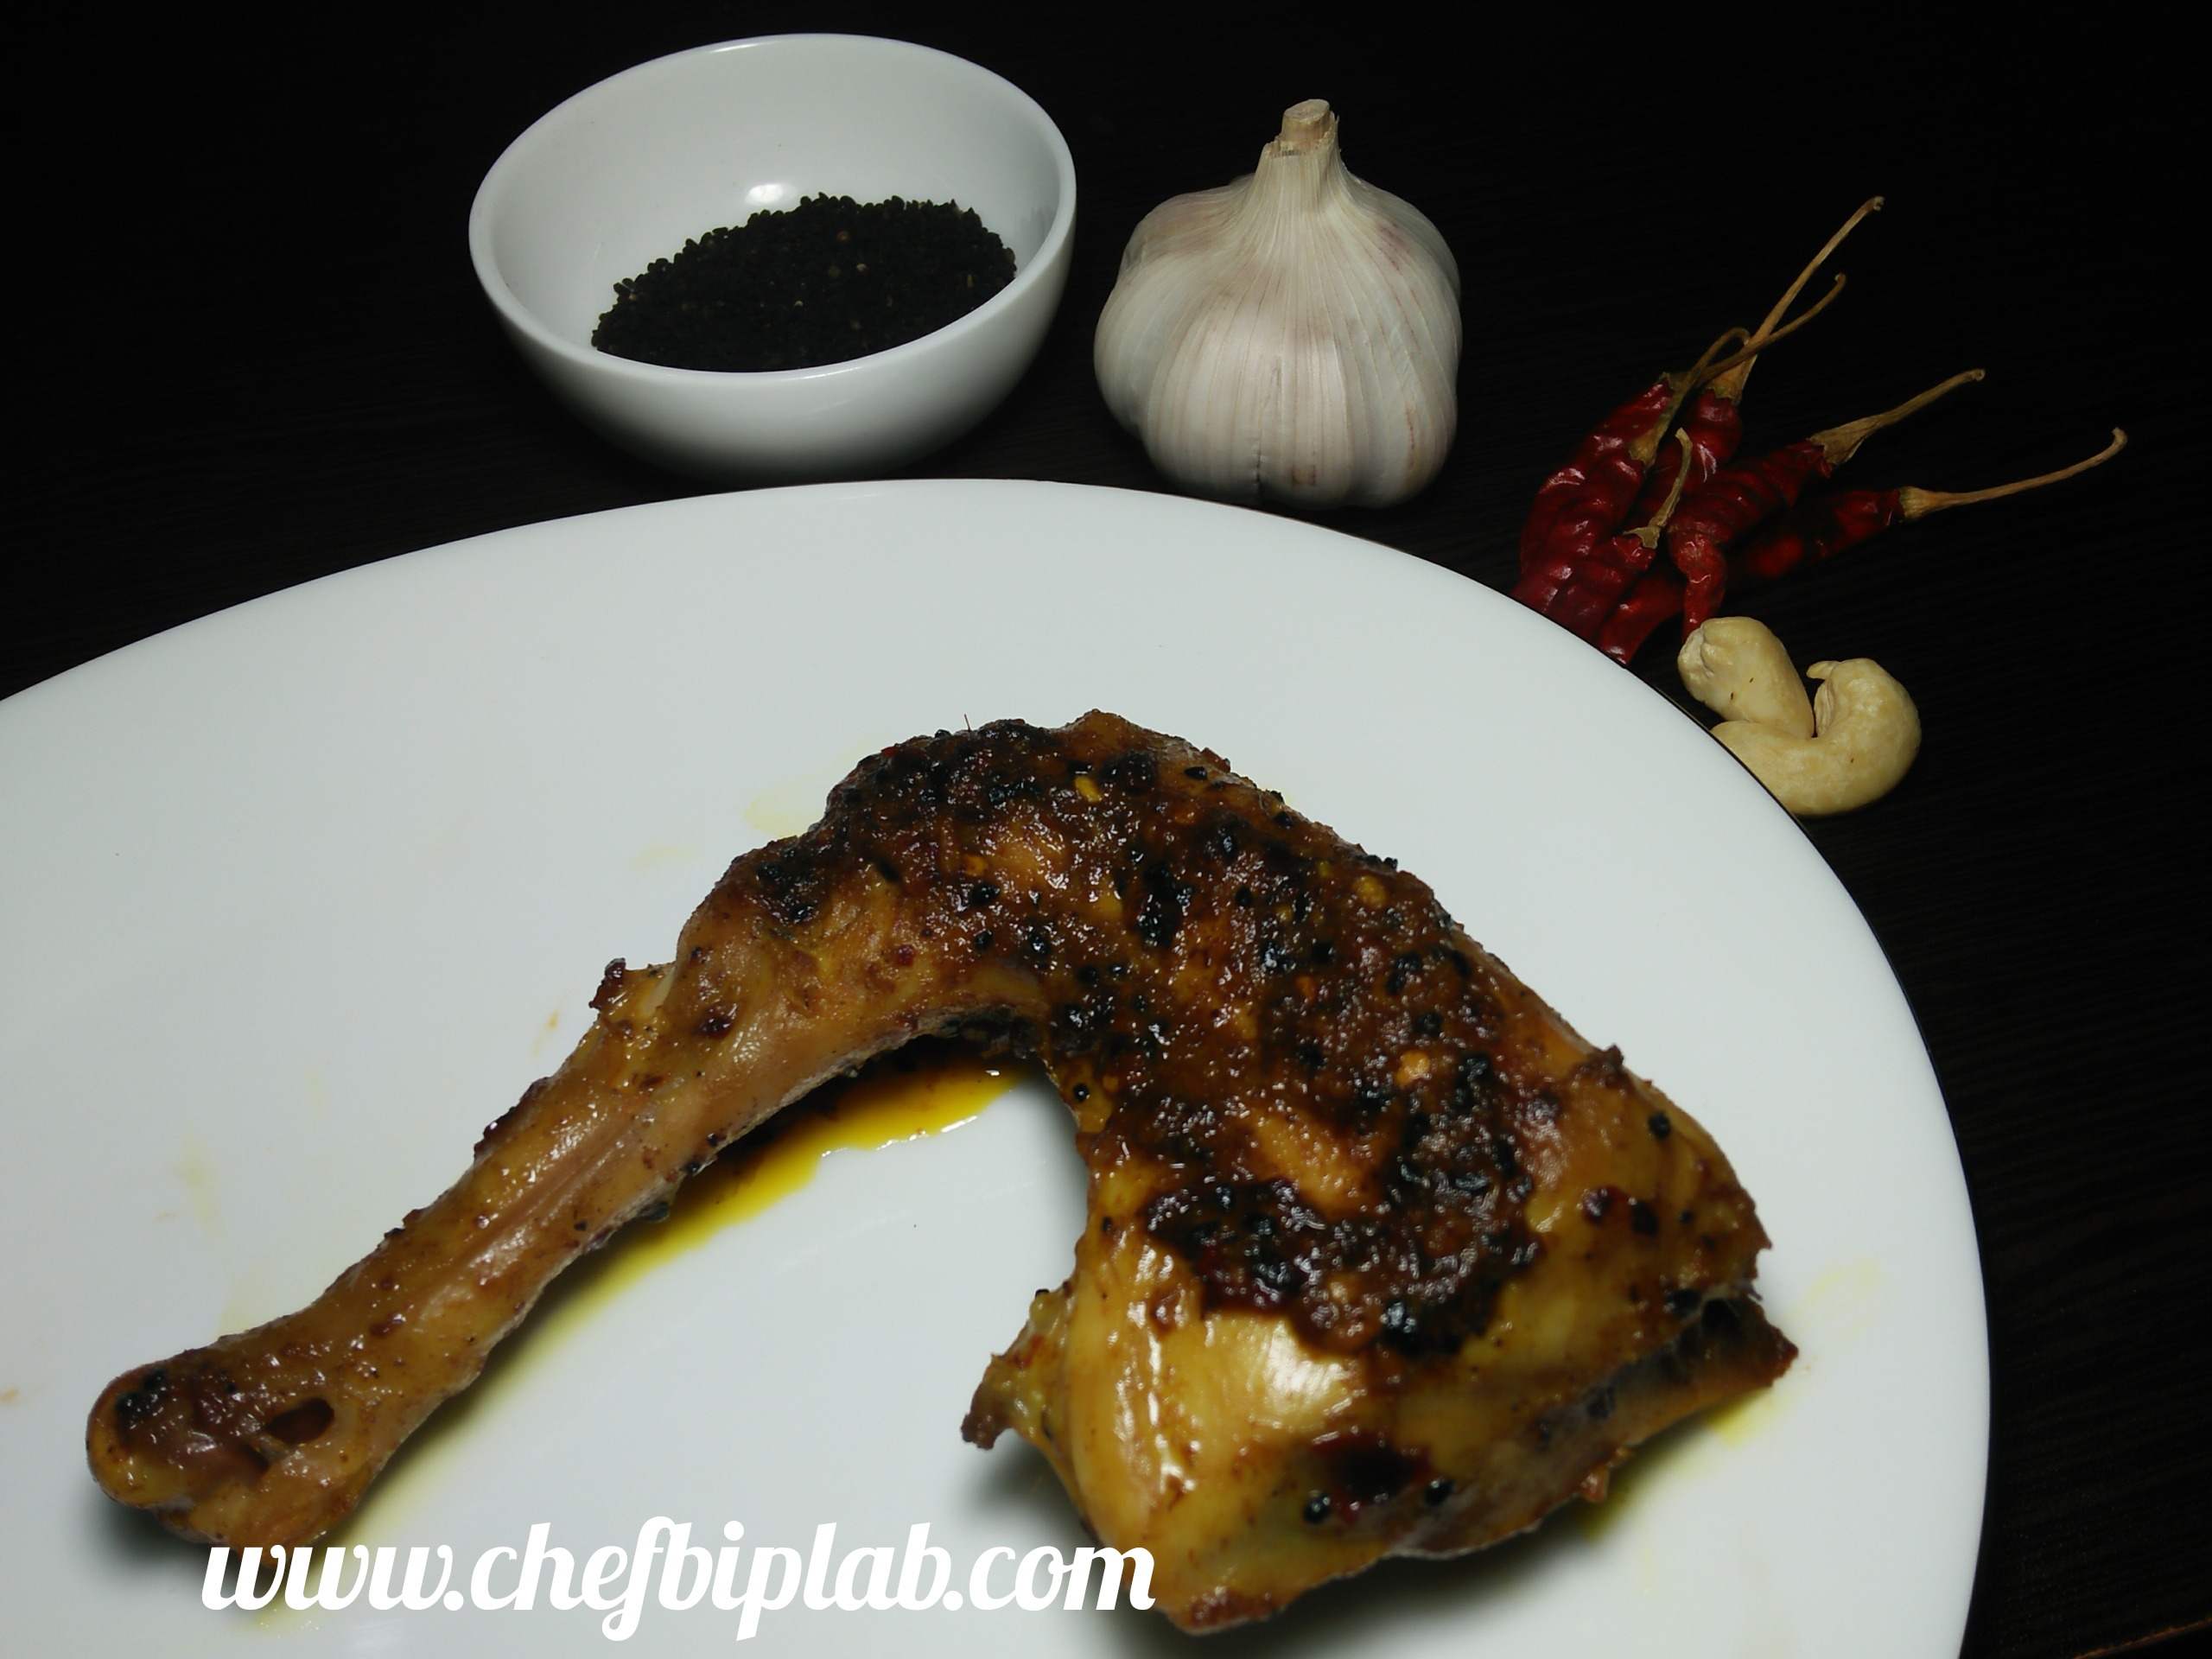 Pan grilled chicken with black cumin